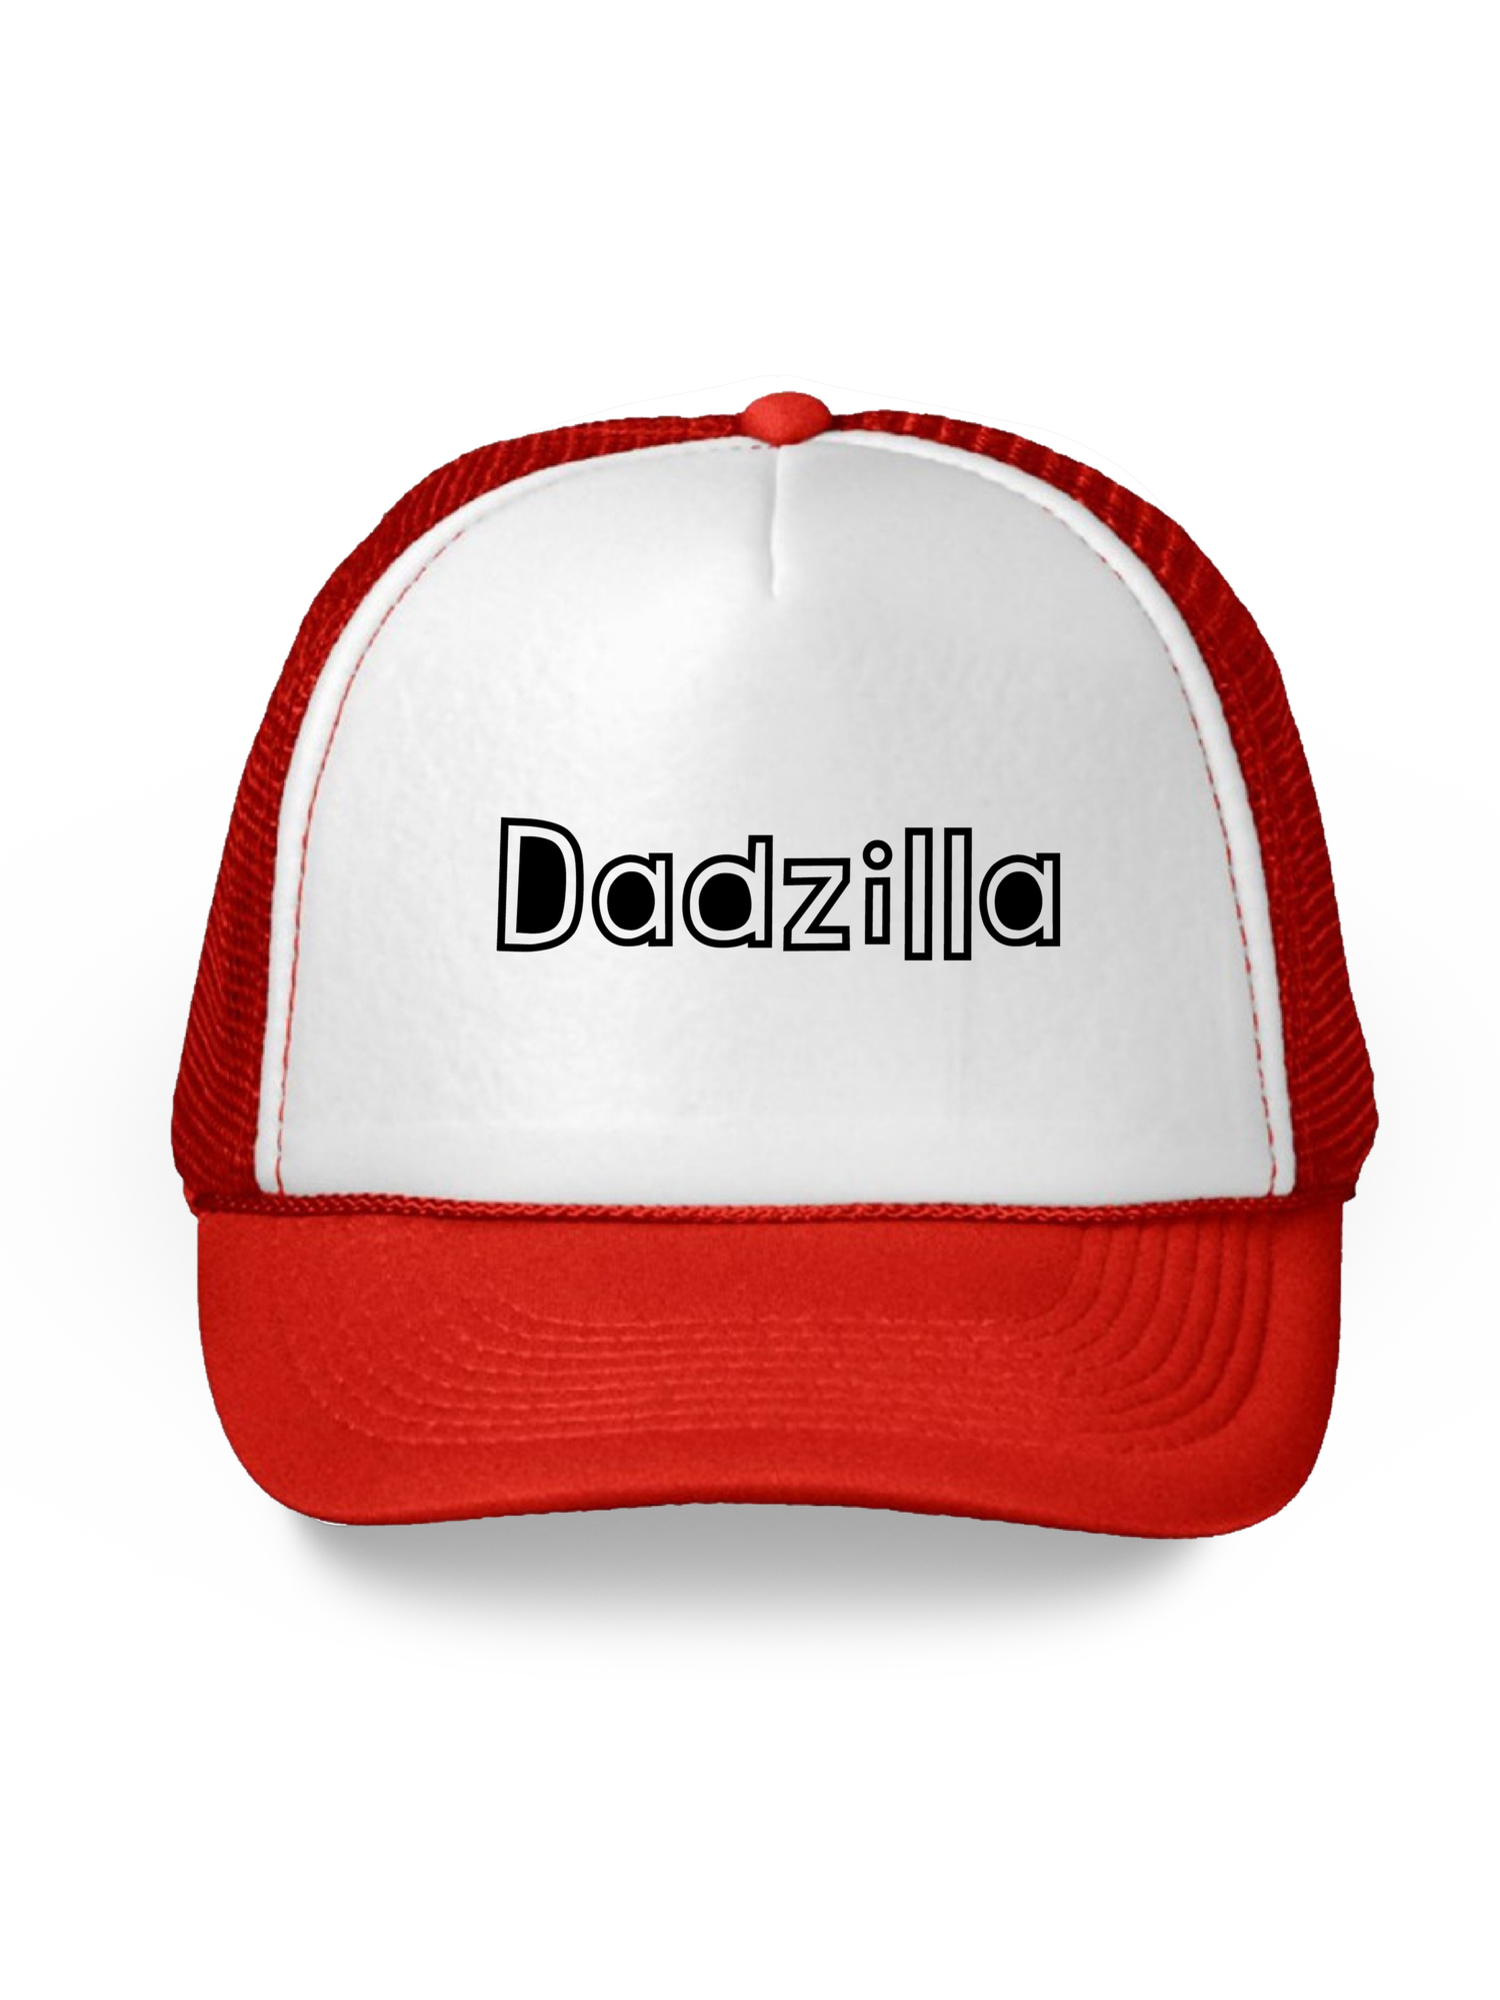 Awkward Styles Dadzilla Trucker Hat Funny Dad Hats With Sayings Father's Day Gifts for Men Dad 2018 Hat Boss Dad Snapback Hat Father's Day Trucker Hats for Men Dad Accessories Daddy Cap Gifts for Dad - image 1 of 6